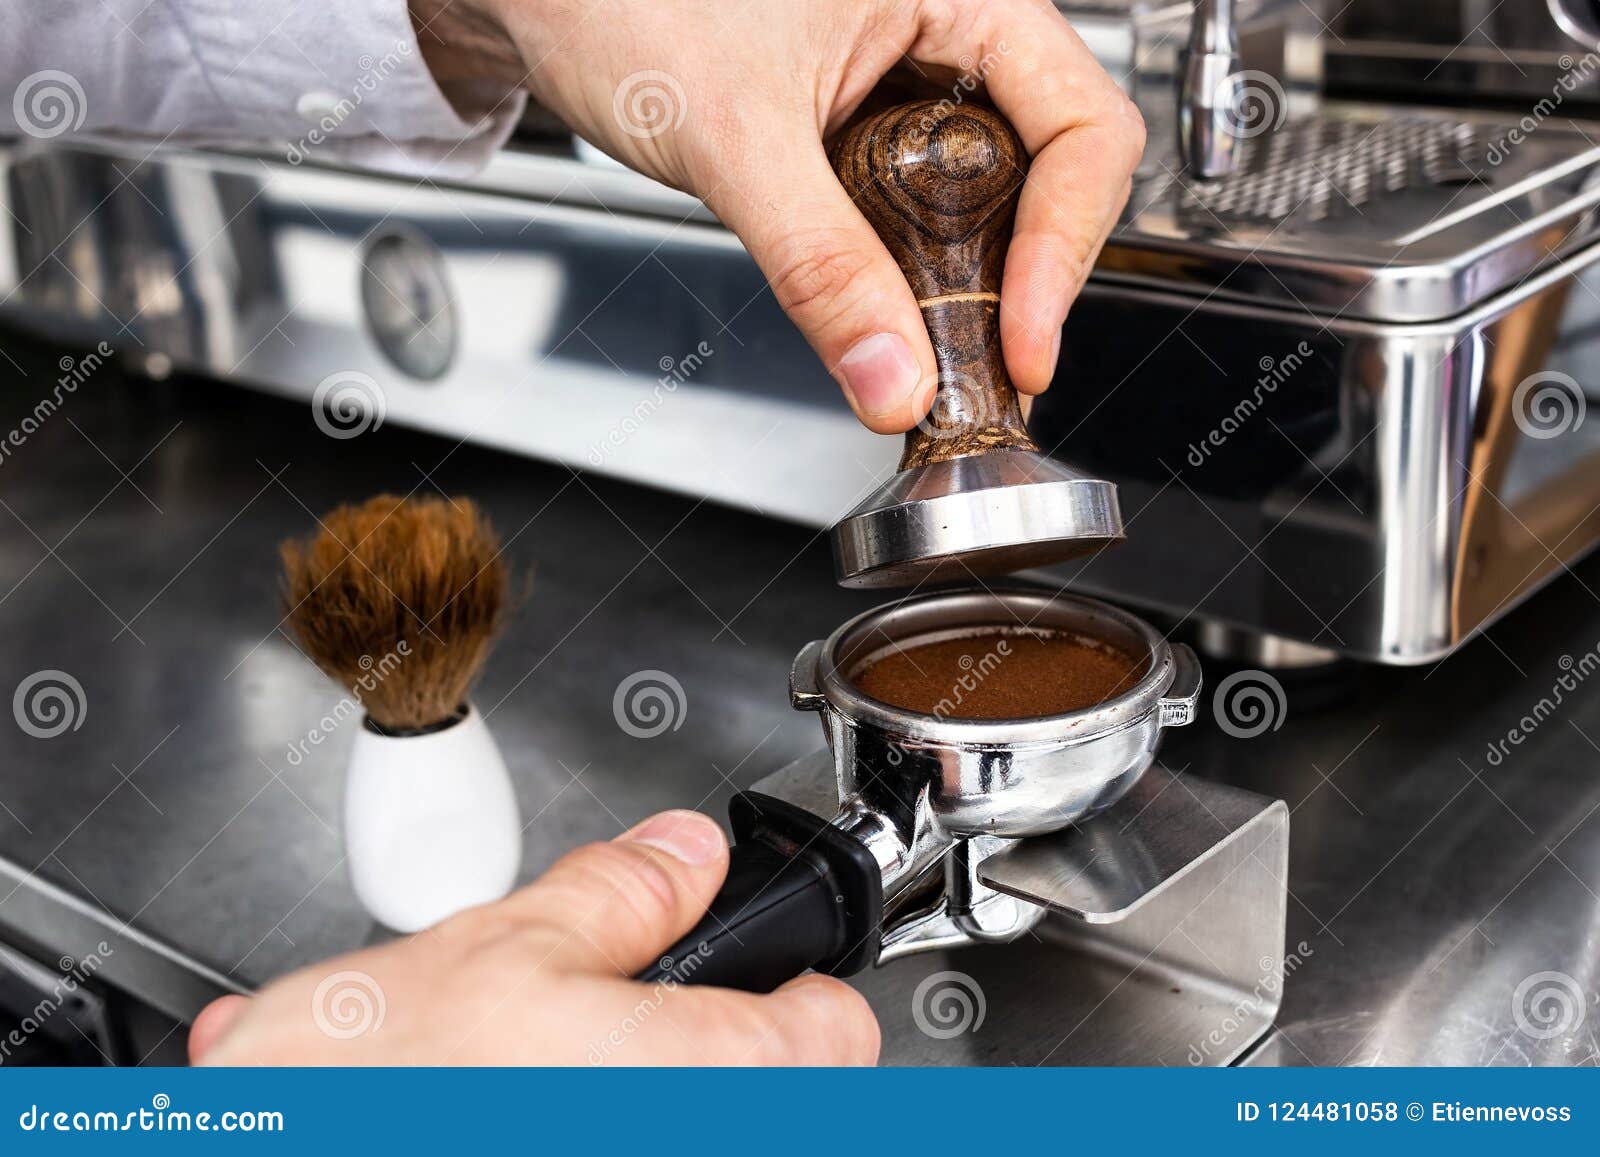 barista pressing ground coffee into portafilter with a tamper.